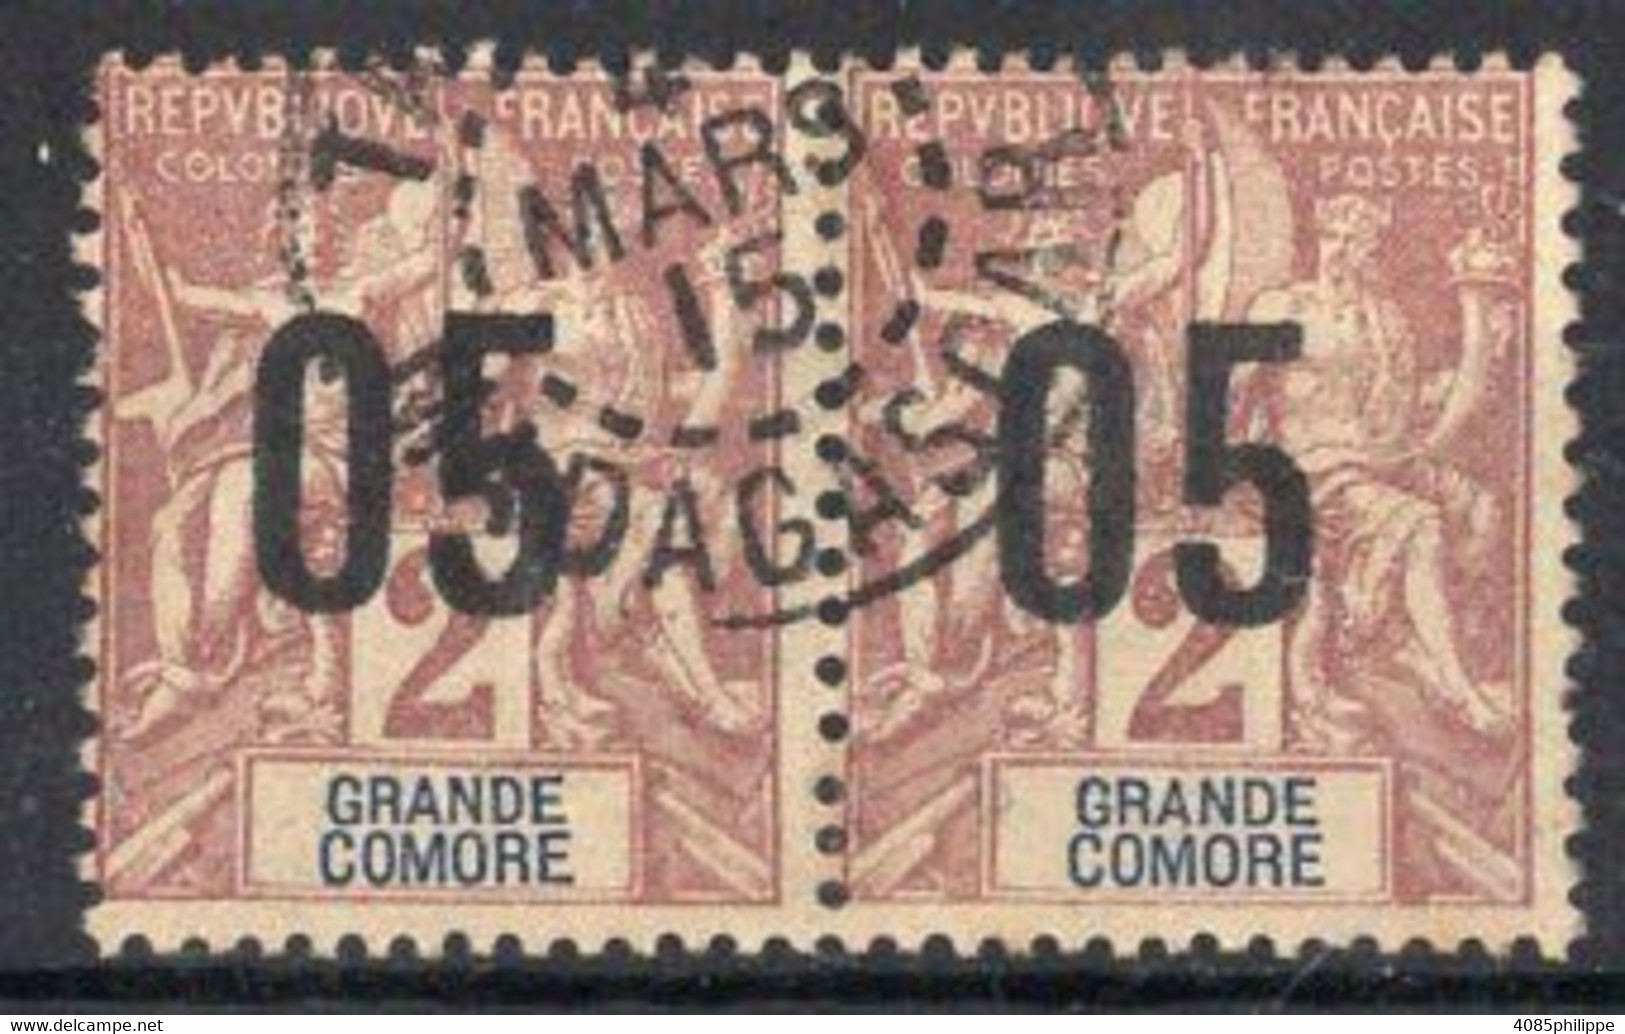 GRANDE COMORE Timbre-poste N° 20 Paire Oblitérée Cote : 4€00 - Used Stamps